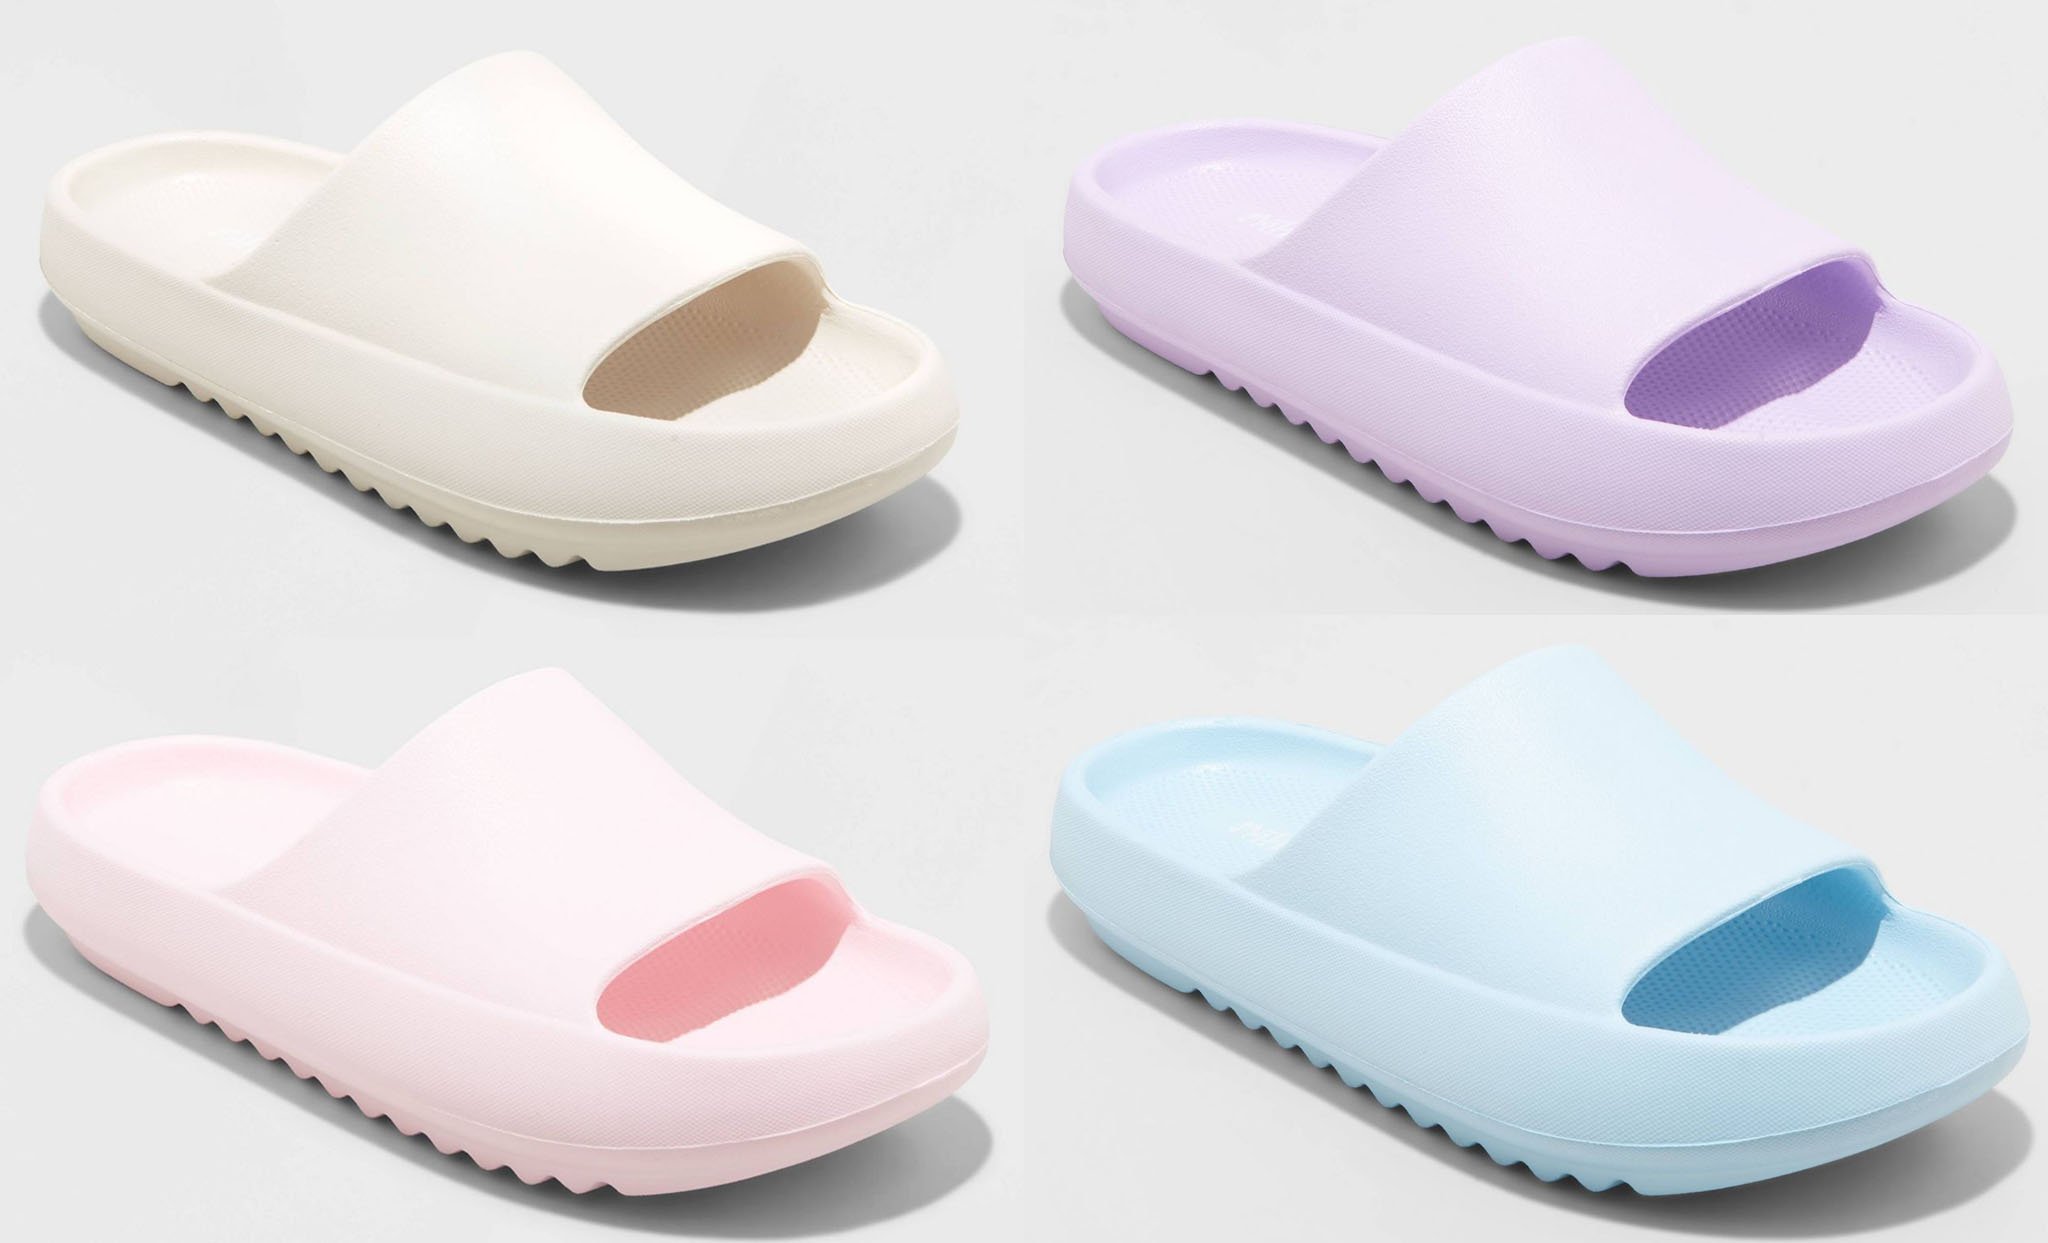 Target's Mad Love "Star" slides are available in a variety of pastel colors